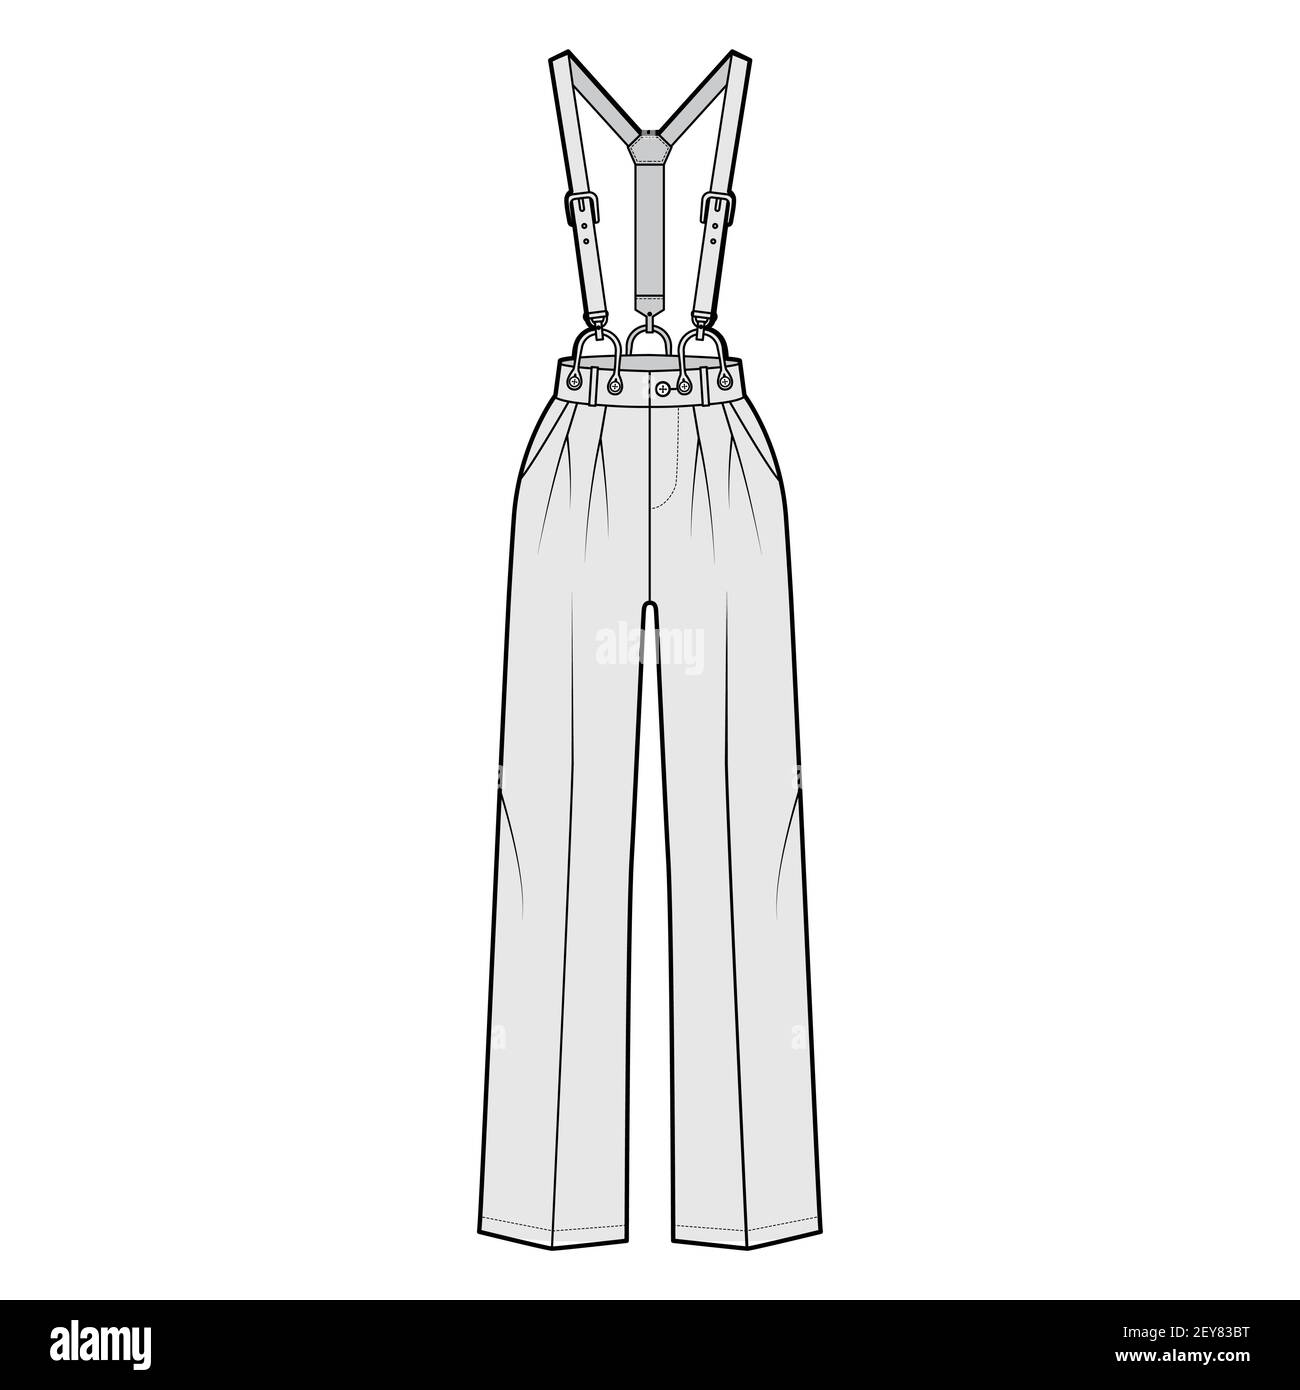 Suspender Pants Dungarees technical fashion illustration with full length, normal waist, high rise, pockets. Flat apparel garment bottom front, grey color style. Women, men unisex CAD mockup Stock Vector